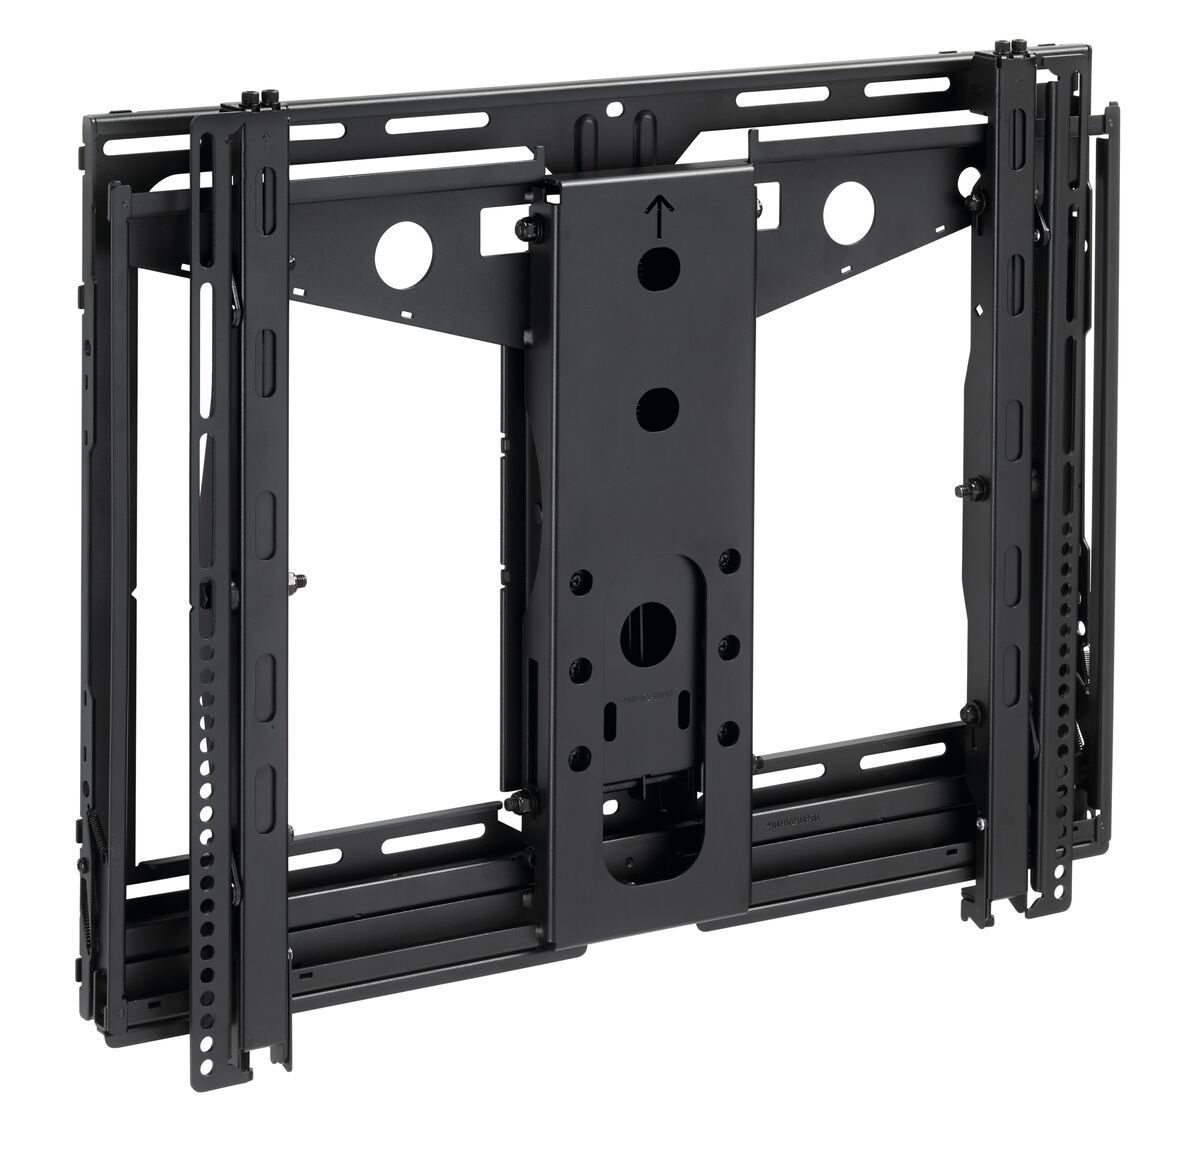 Vogel's - PFW 6880 Video Wall Pop-Out Mount